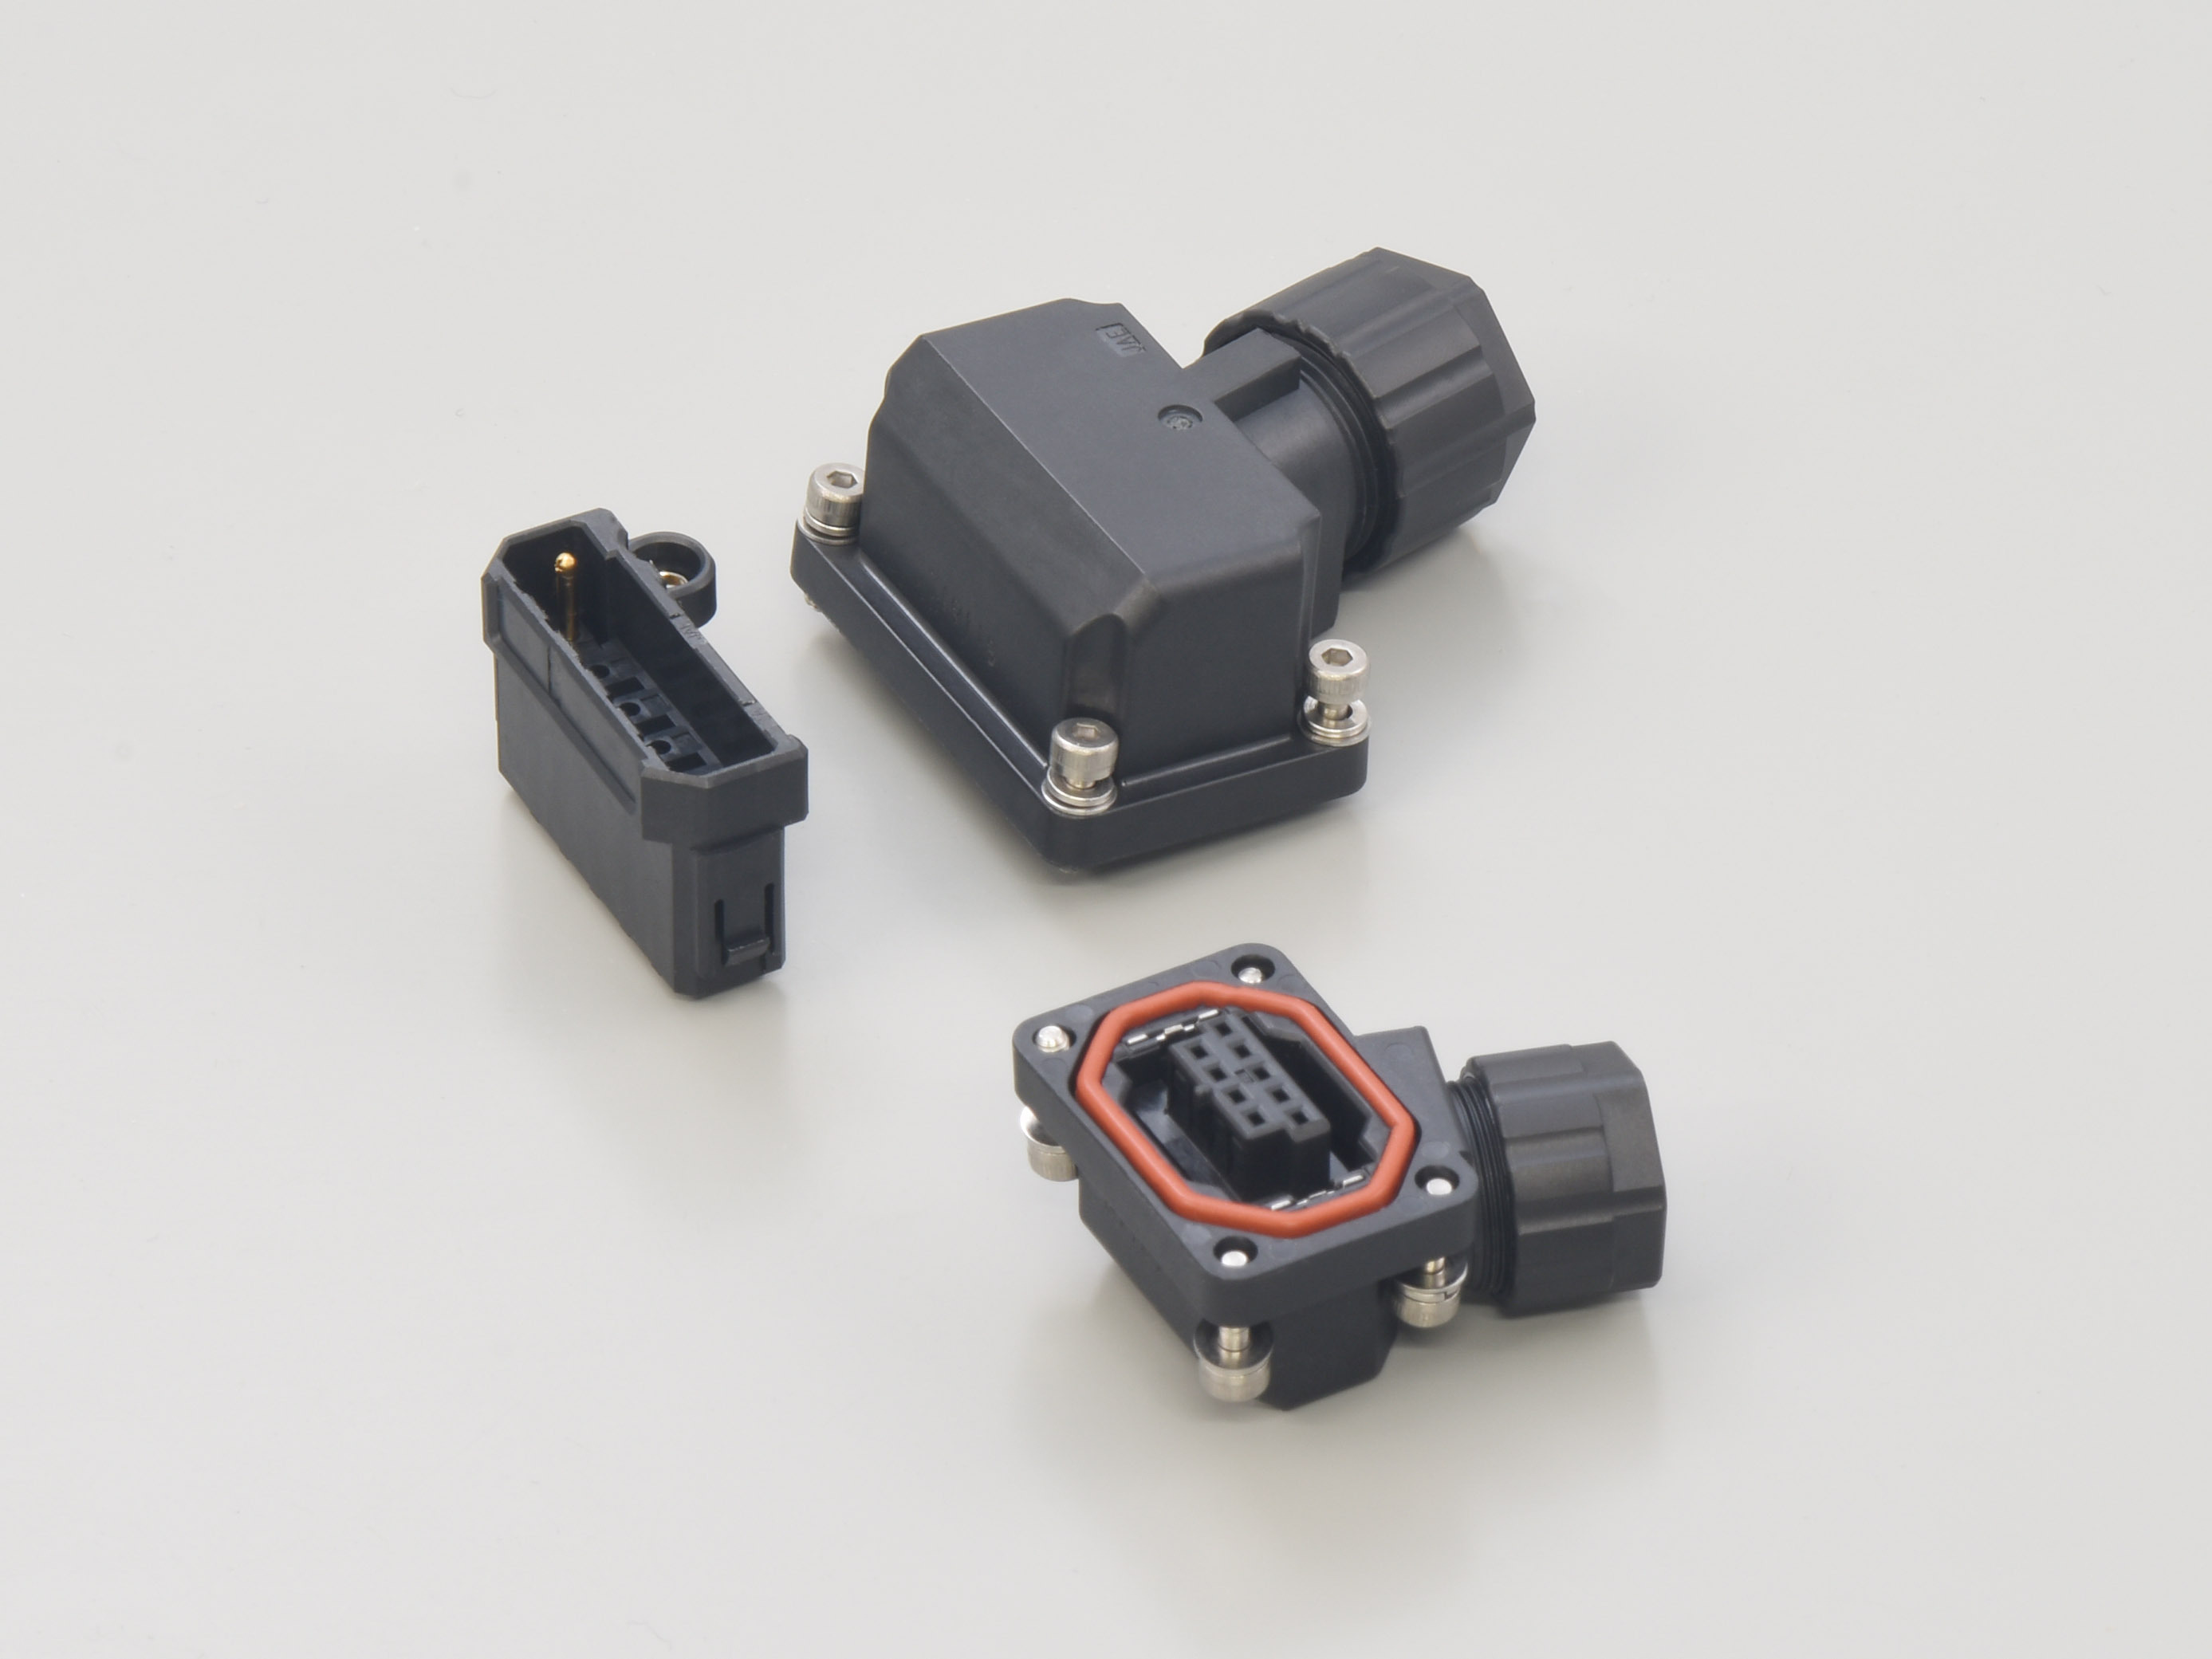 New Product Release: JN13 Series All-Plastic and Low-Profile Waterproof Industrial Connector